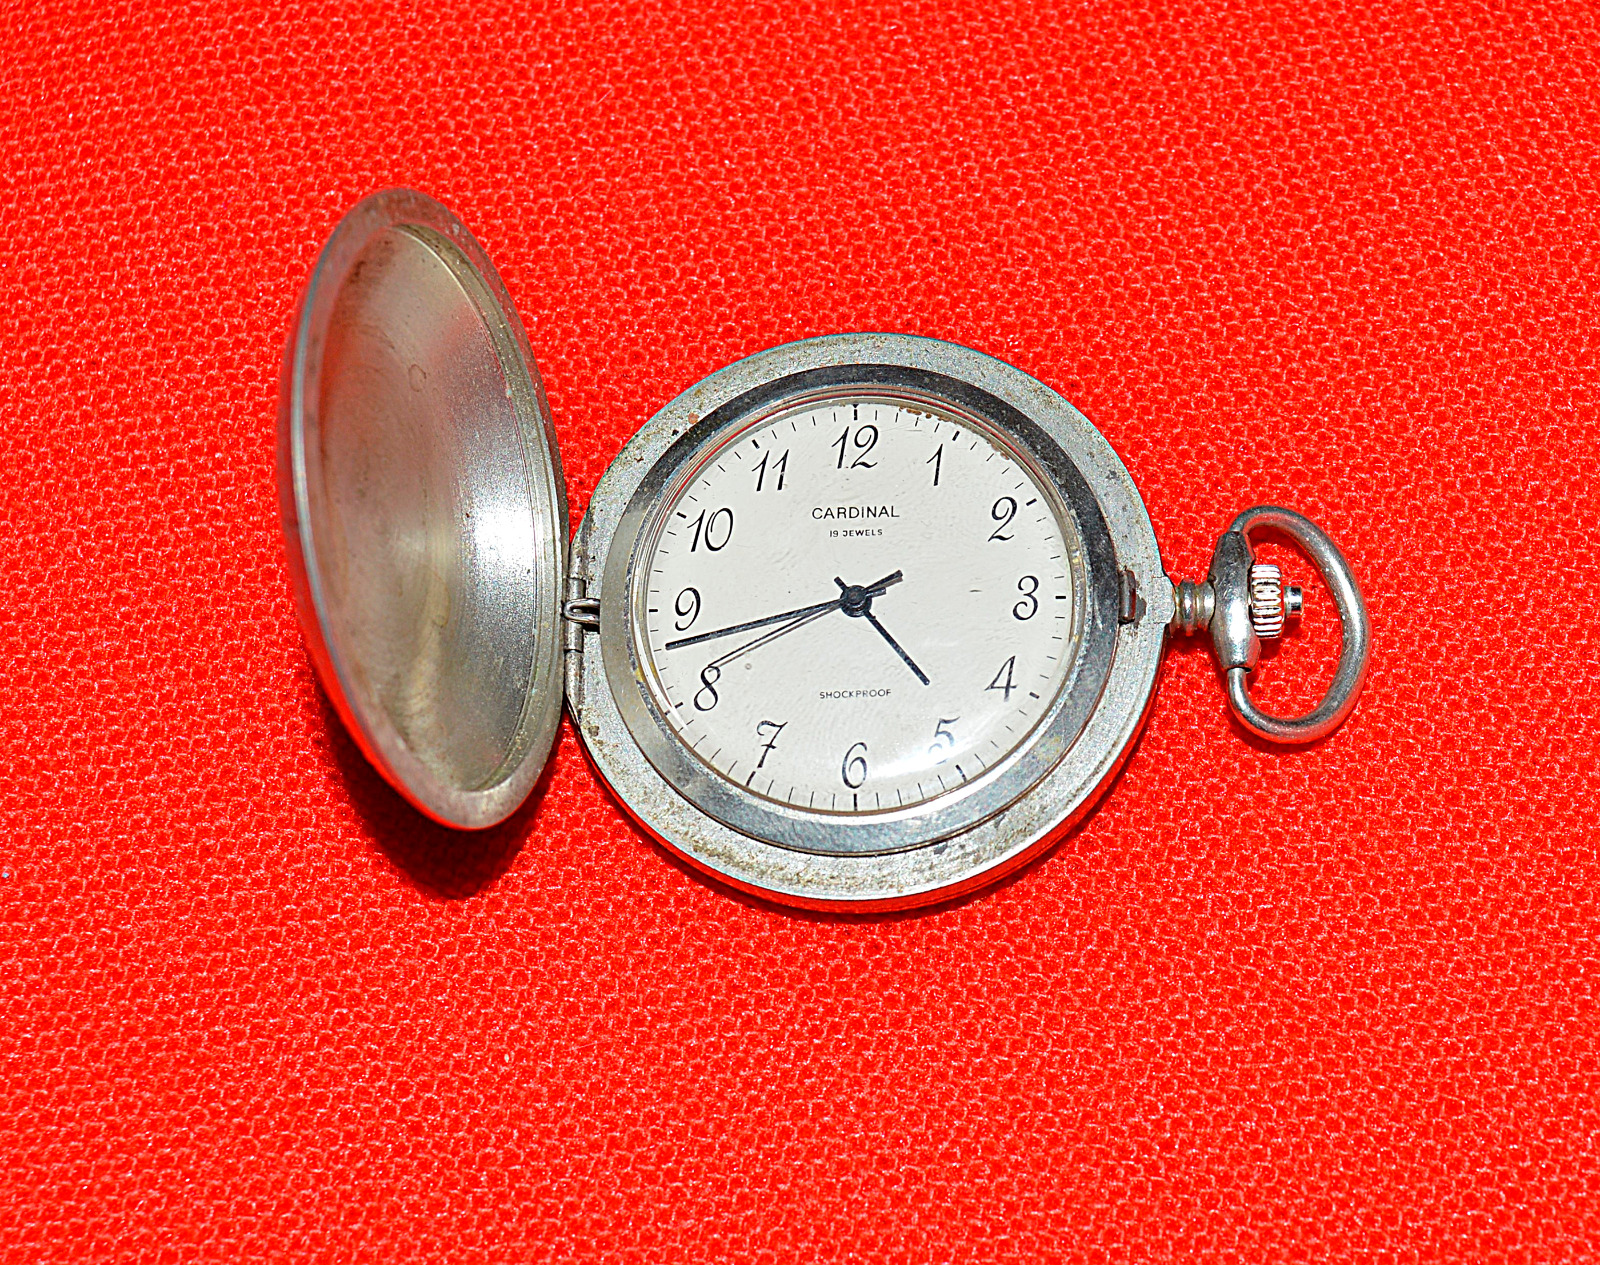 GREAT VINTAGE OLD POCKET CARDINAL WATCHES